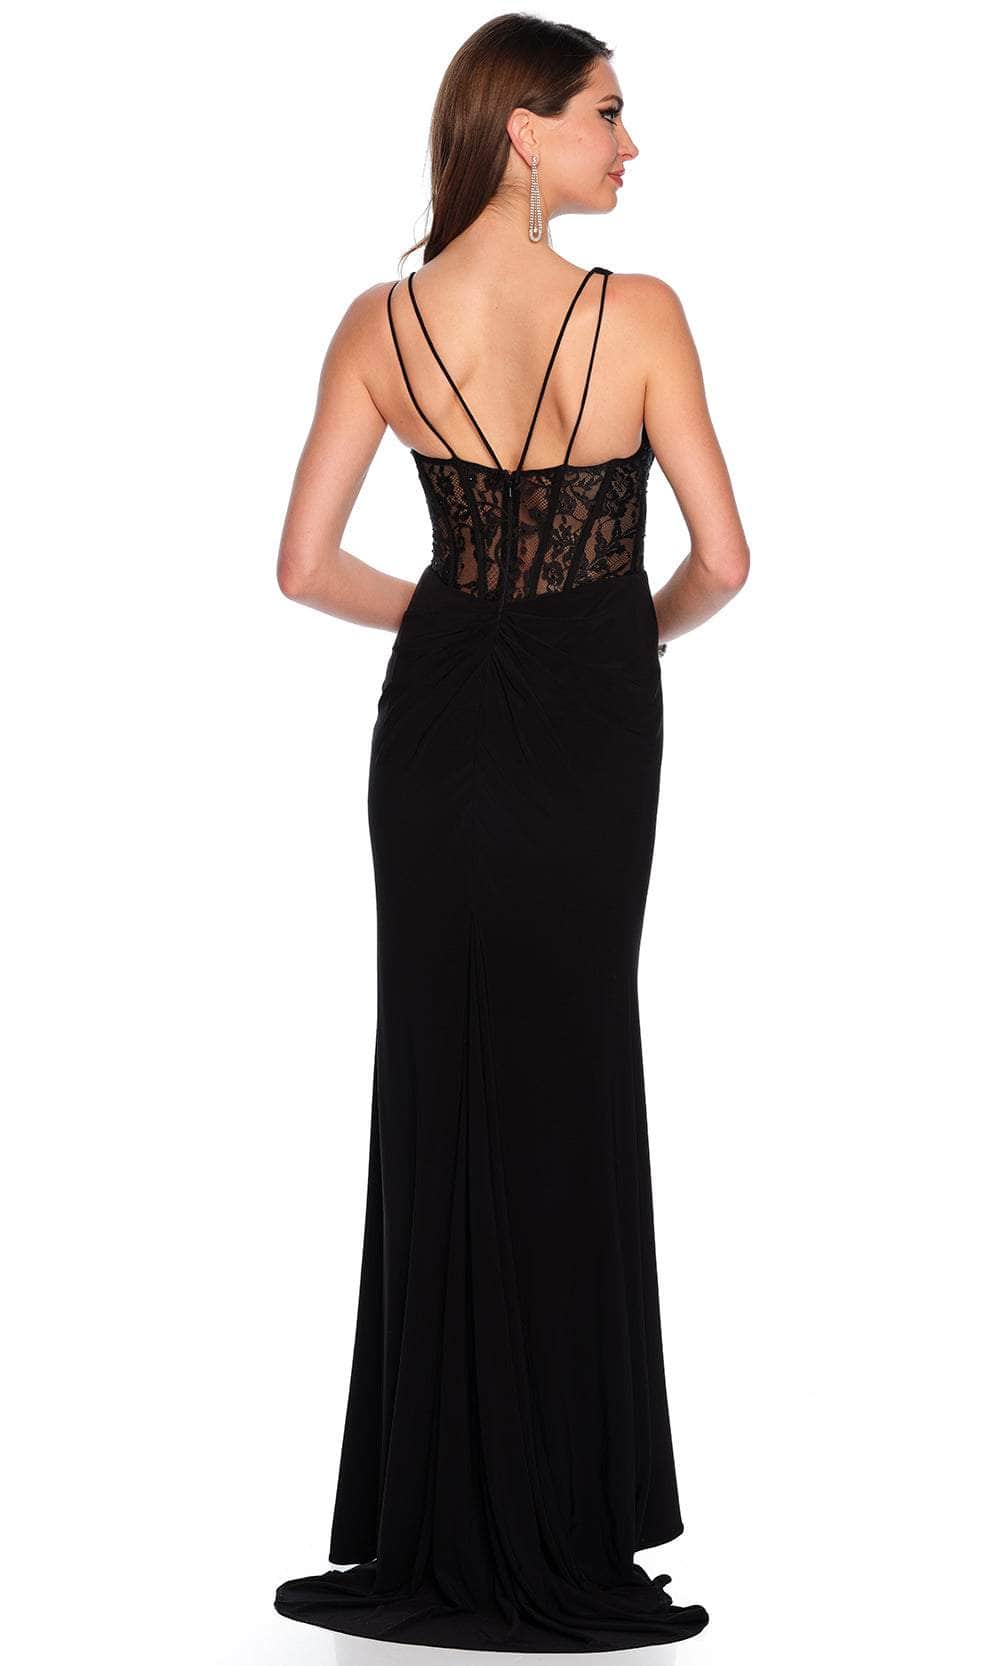 Dave & Johnny 11450 - Sleeveless Lace Corset Prom Gown
